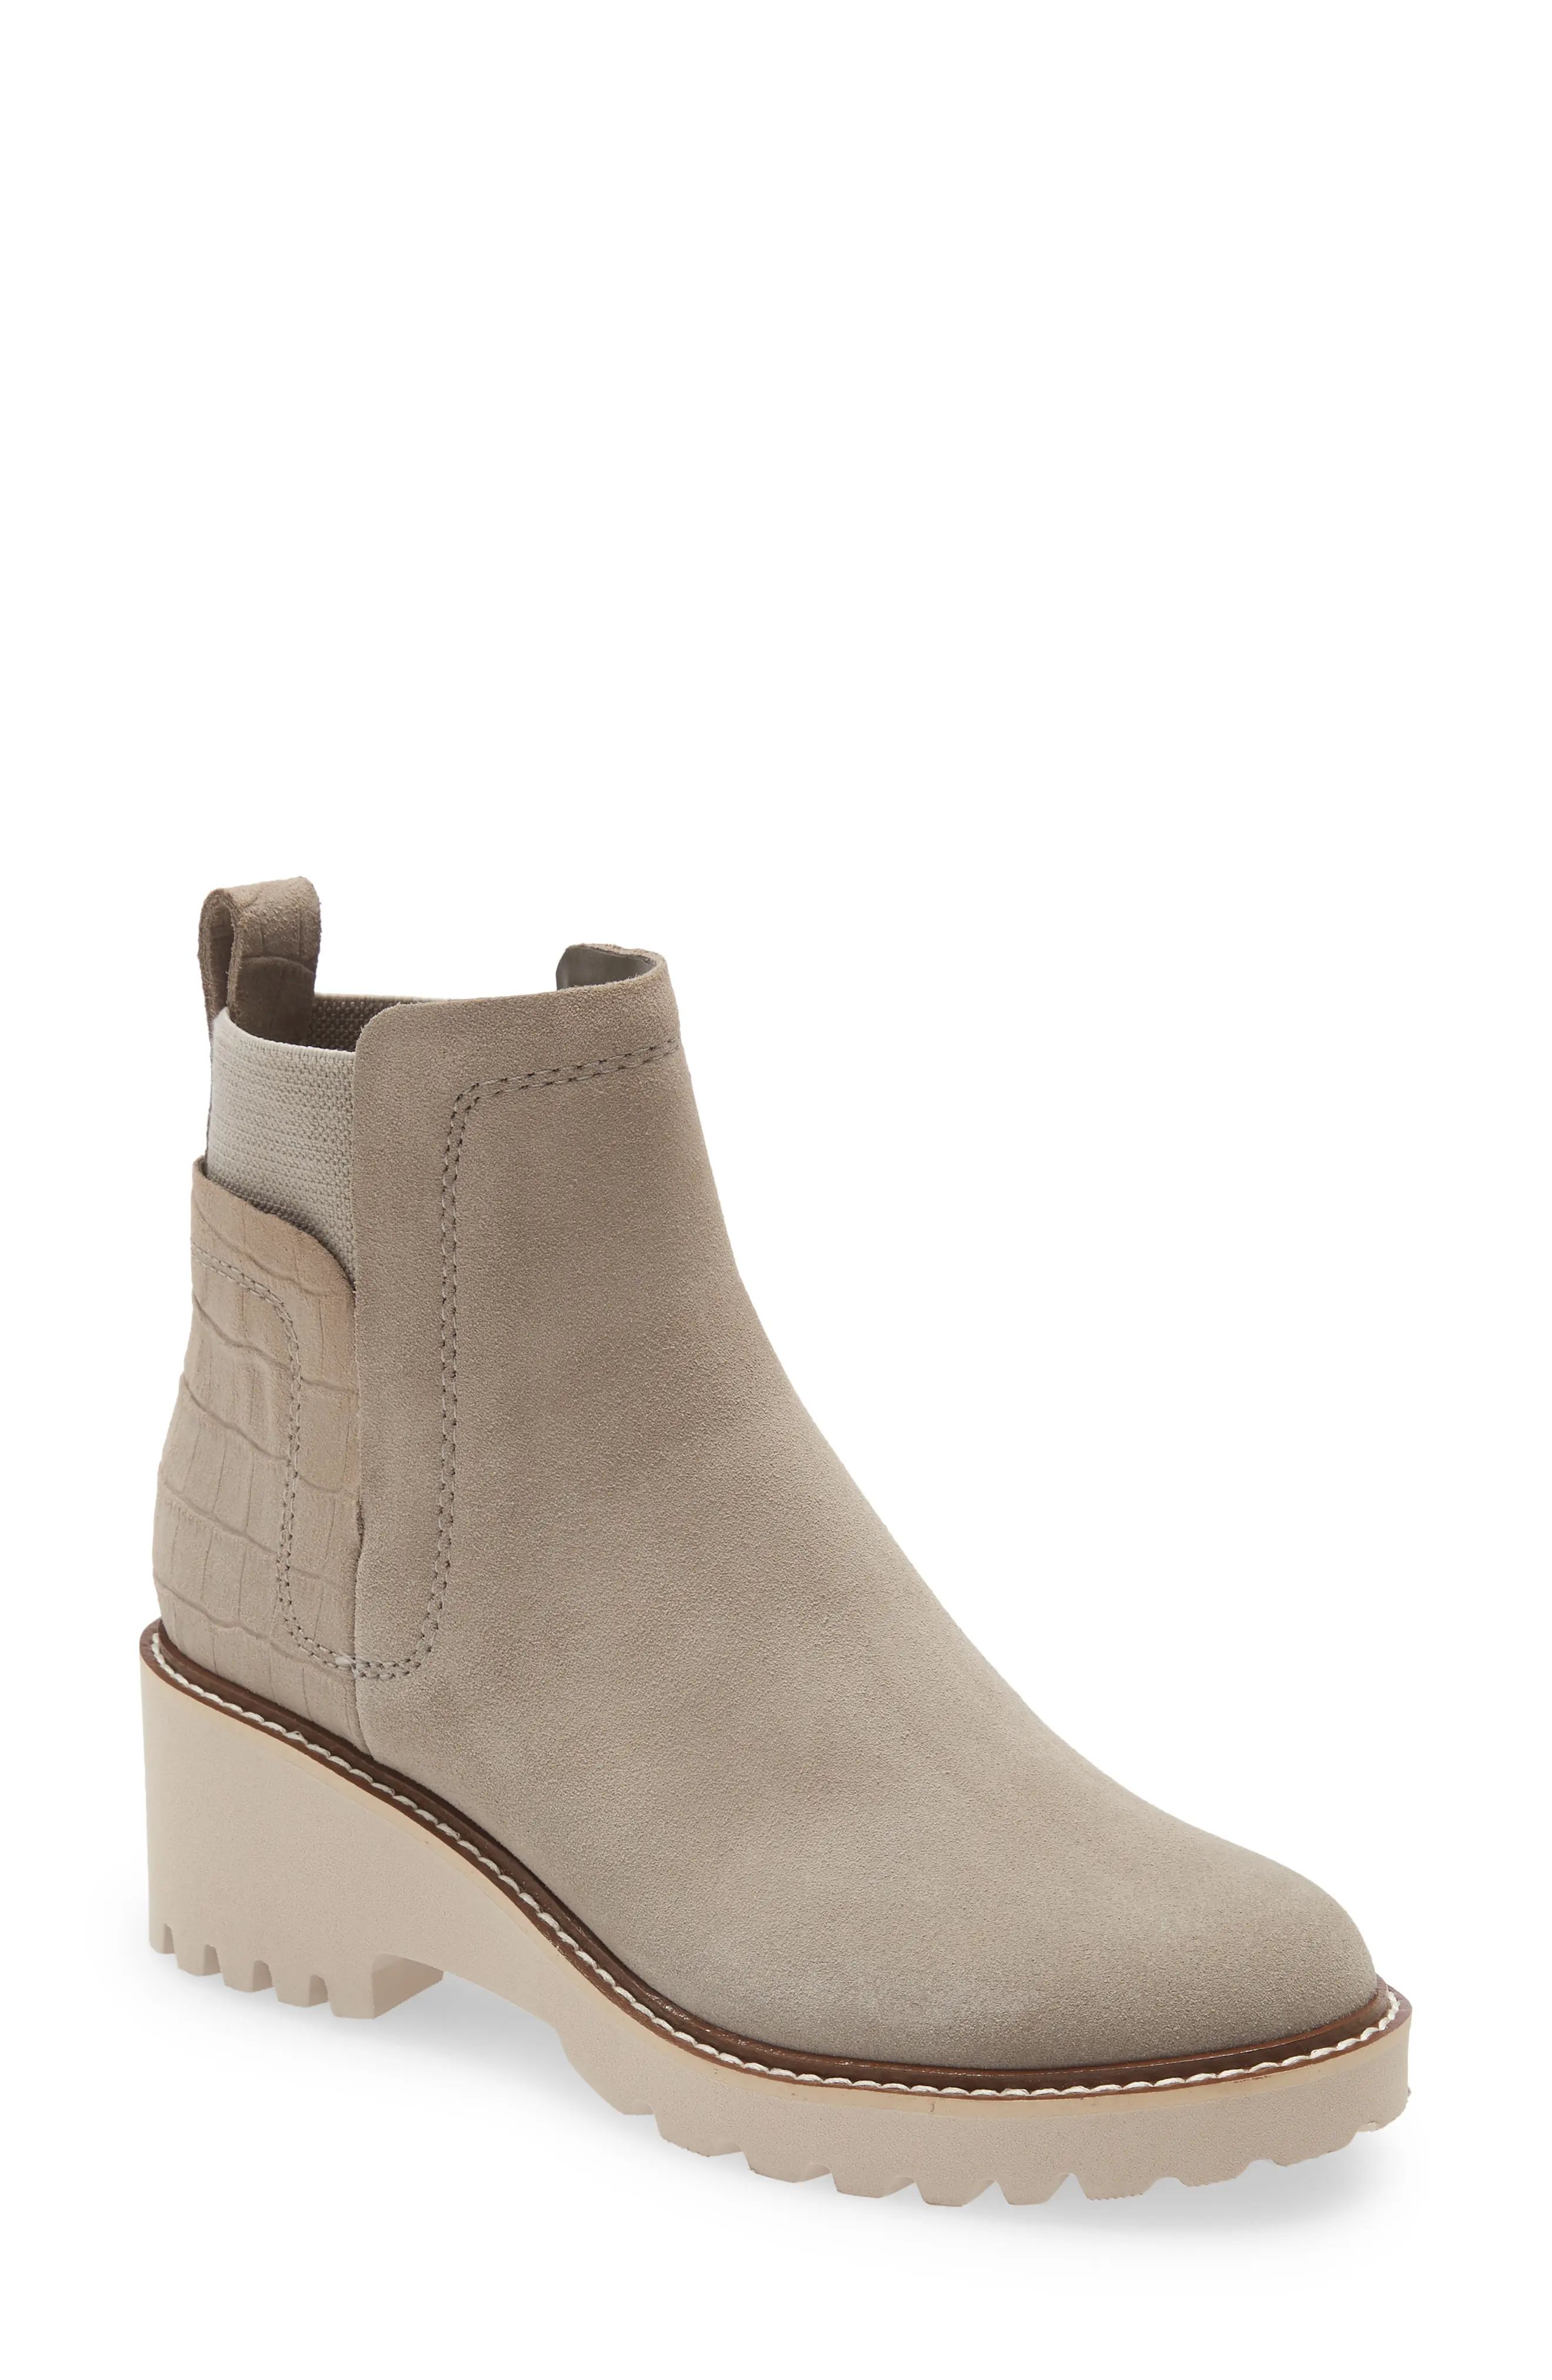 Dolce Vita Huey H20 Water Resistant Bootie, Size 6.5 in Grey Suede H2O at Nordstrom | Nordstrom